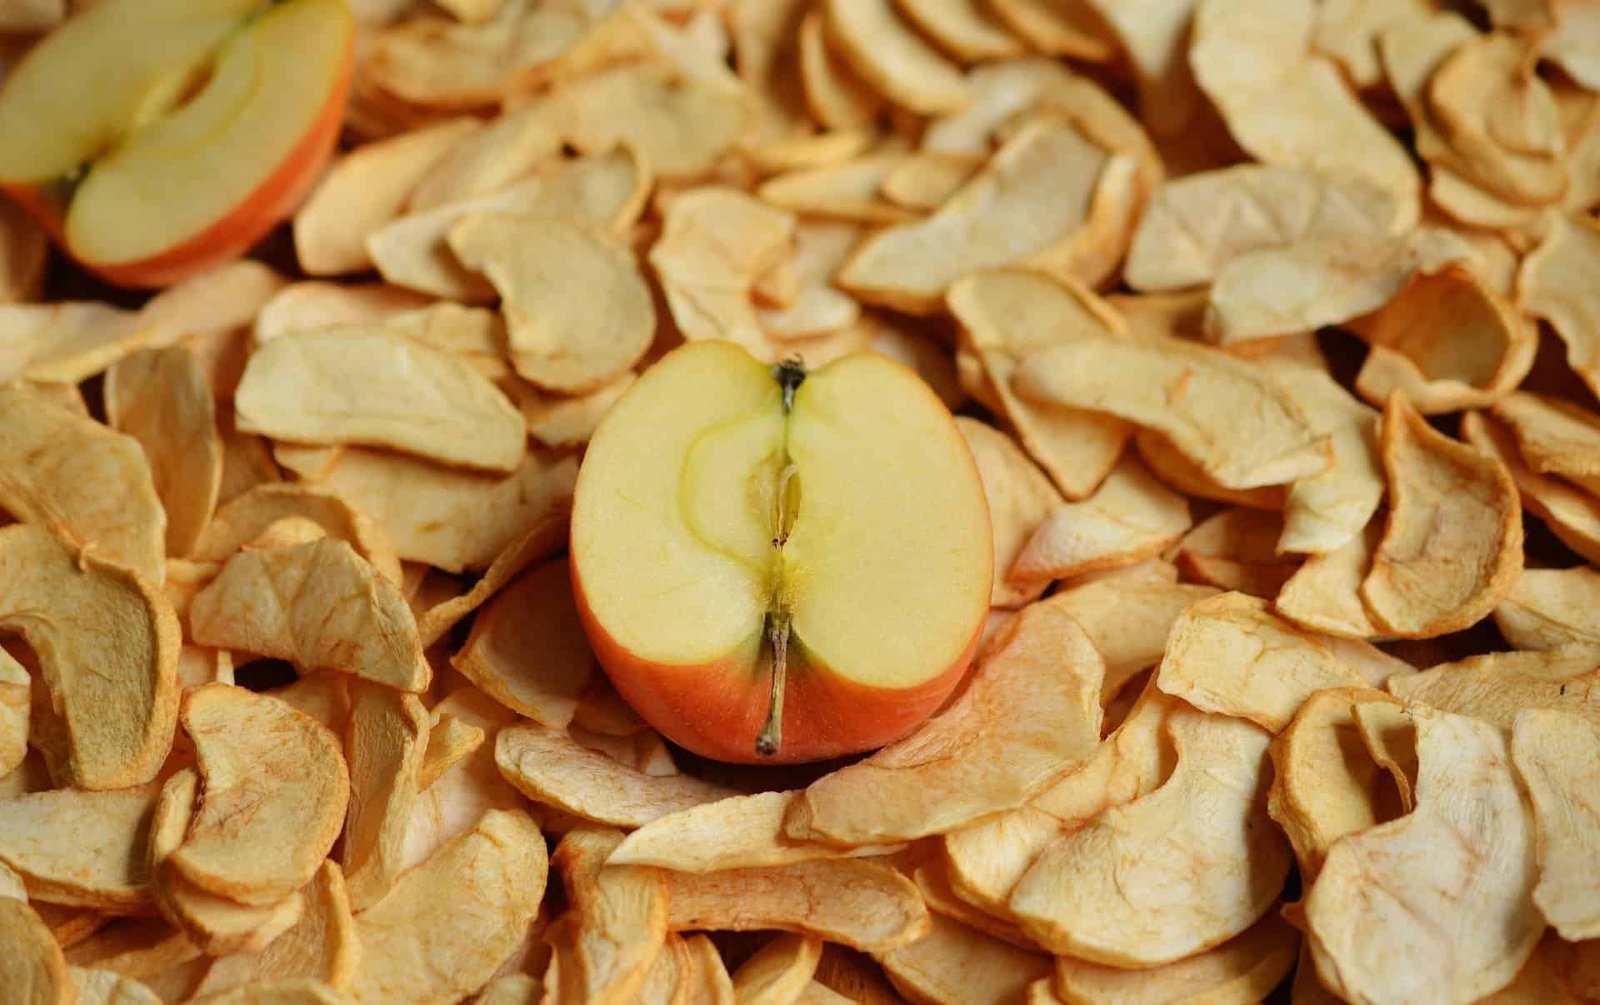 sliced apple on top of dehydrated apple chips